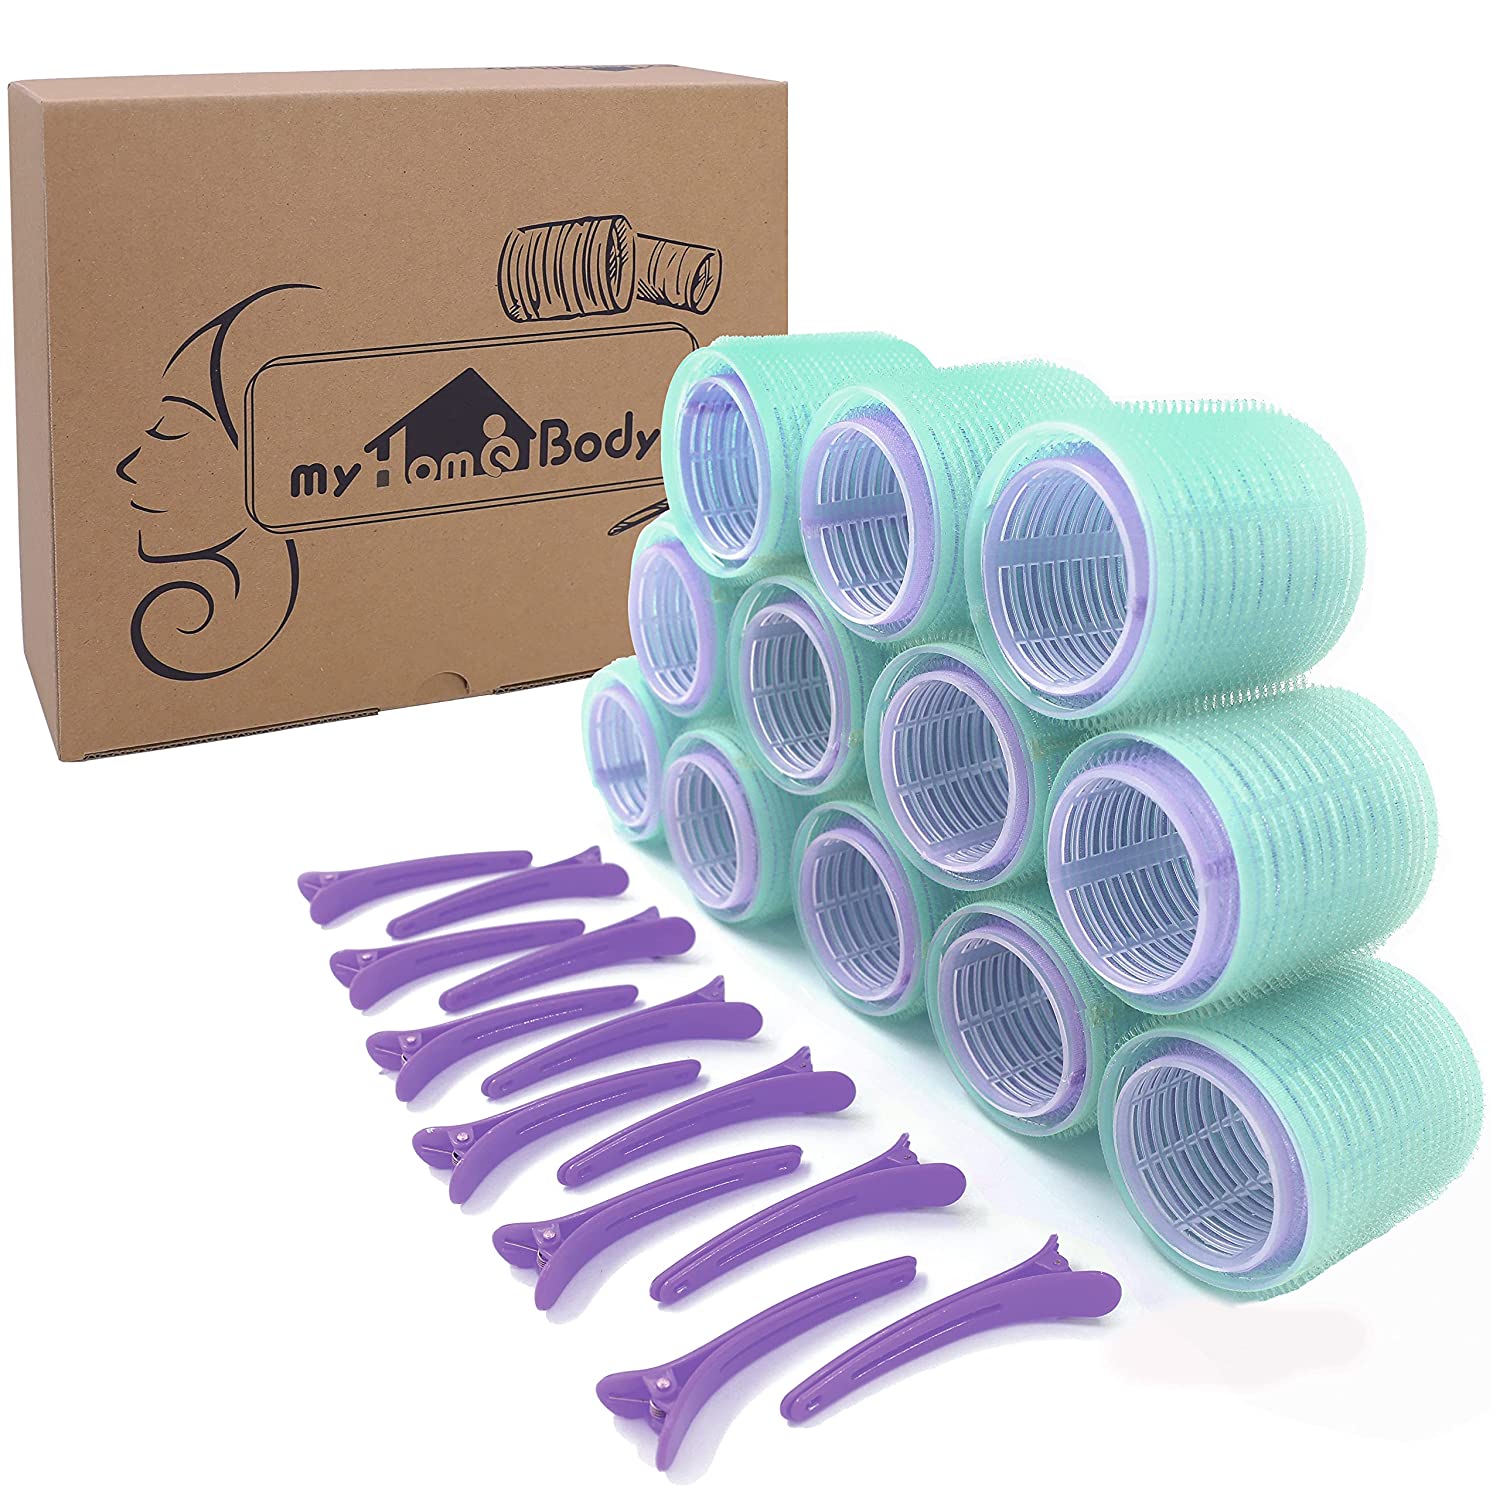 Self Grip Hair Rollers, 2 Sizes, Extra Large and Jumbo 36pc Set - 24 Rollers, 12 Duckbill Hair Clips